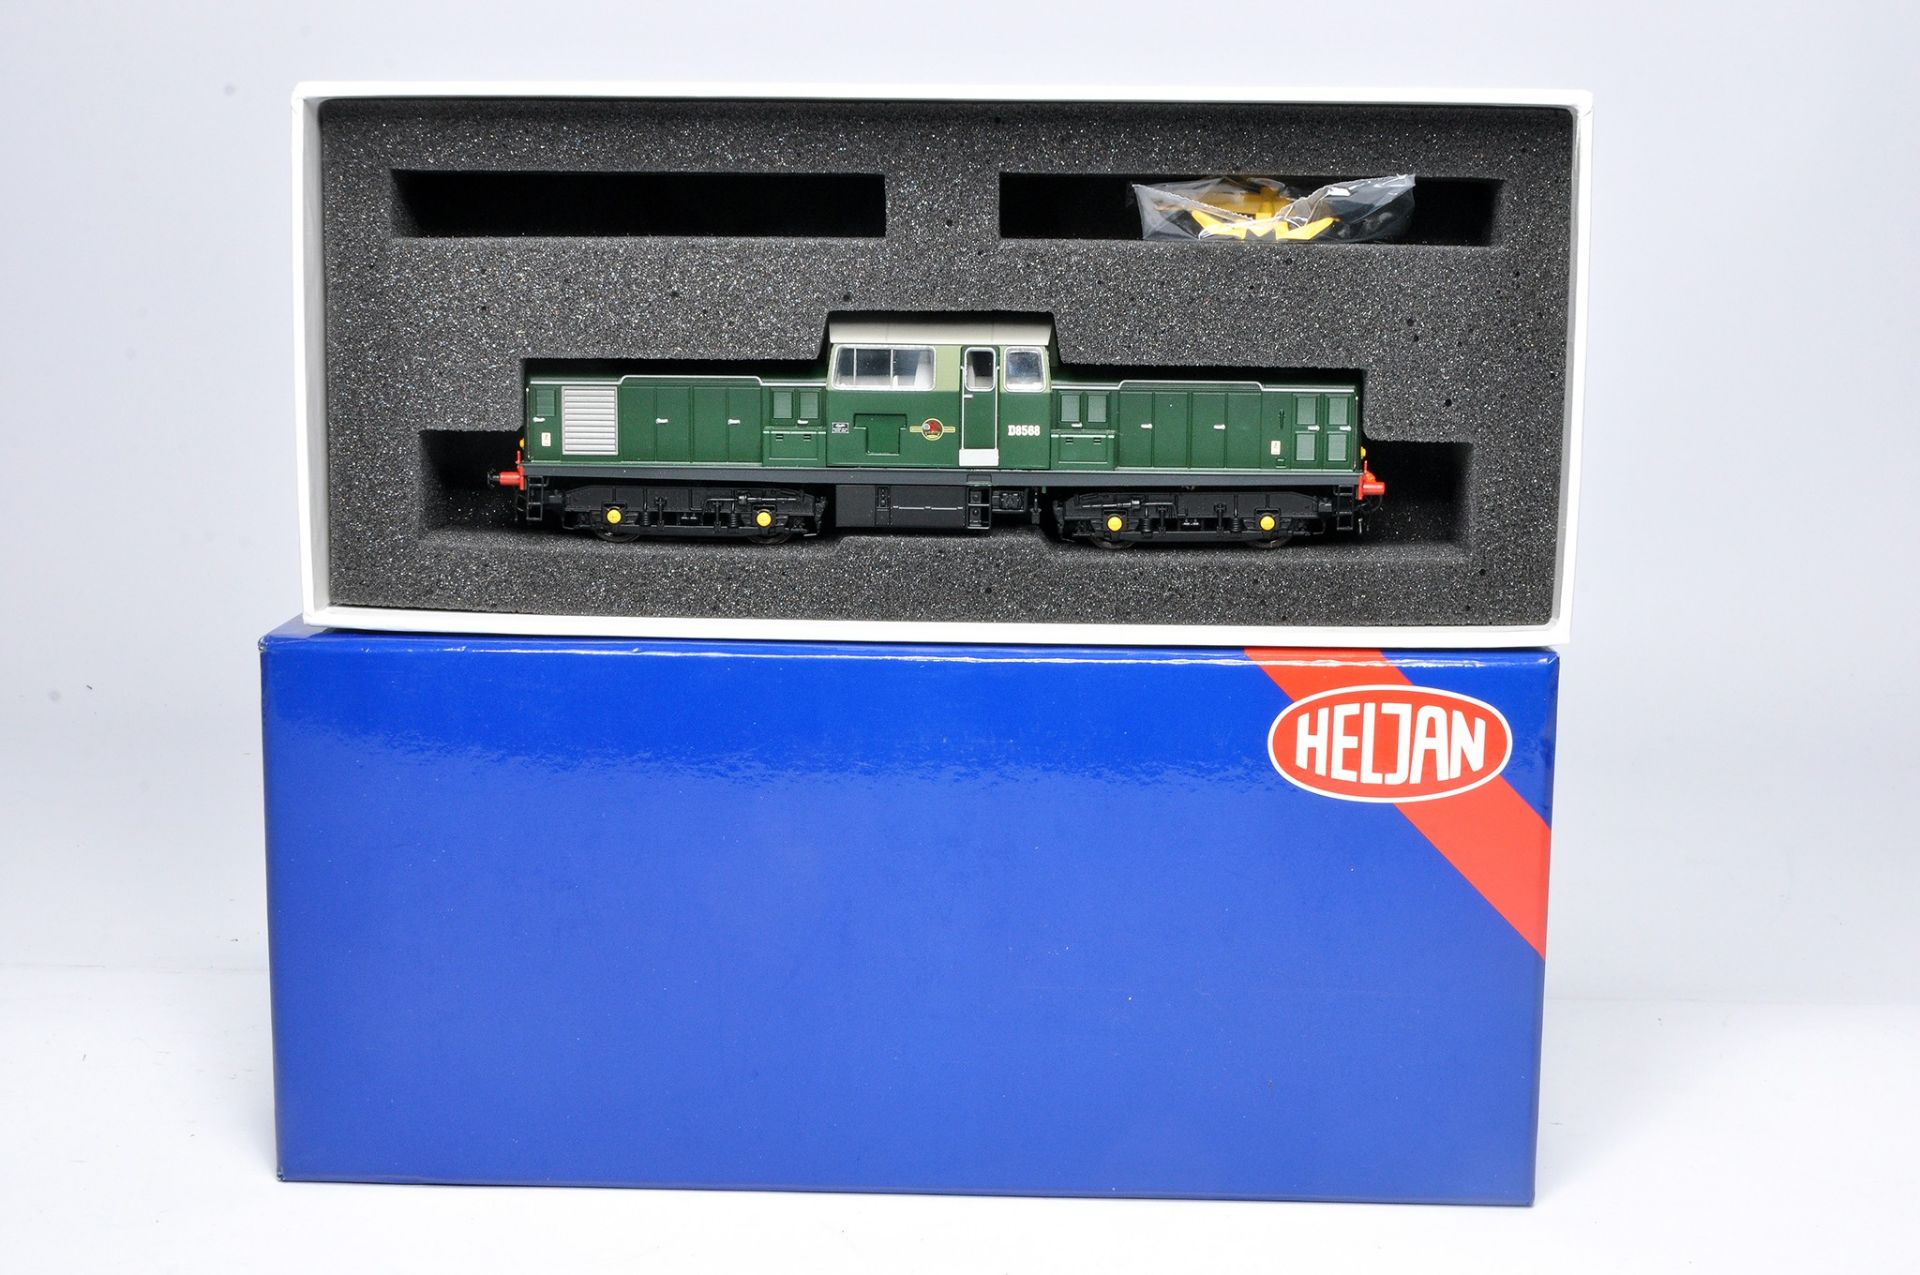 Heljan Model Railway comprising locomotive issue No. 17001 D8568. Looks to be without obvious sign